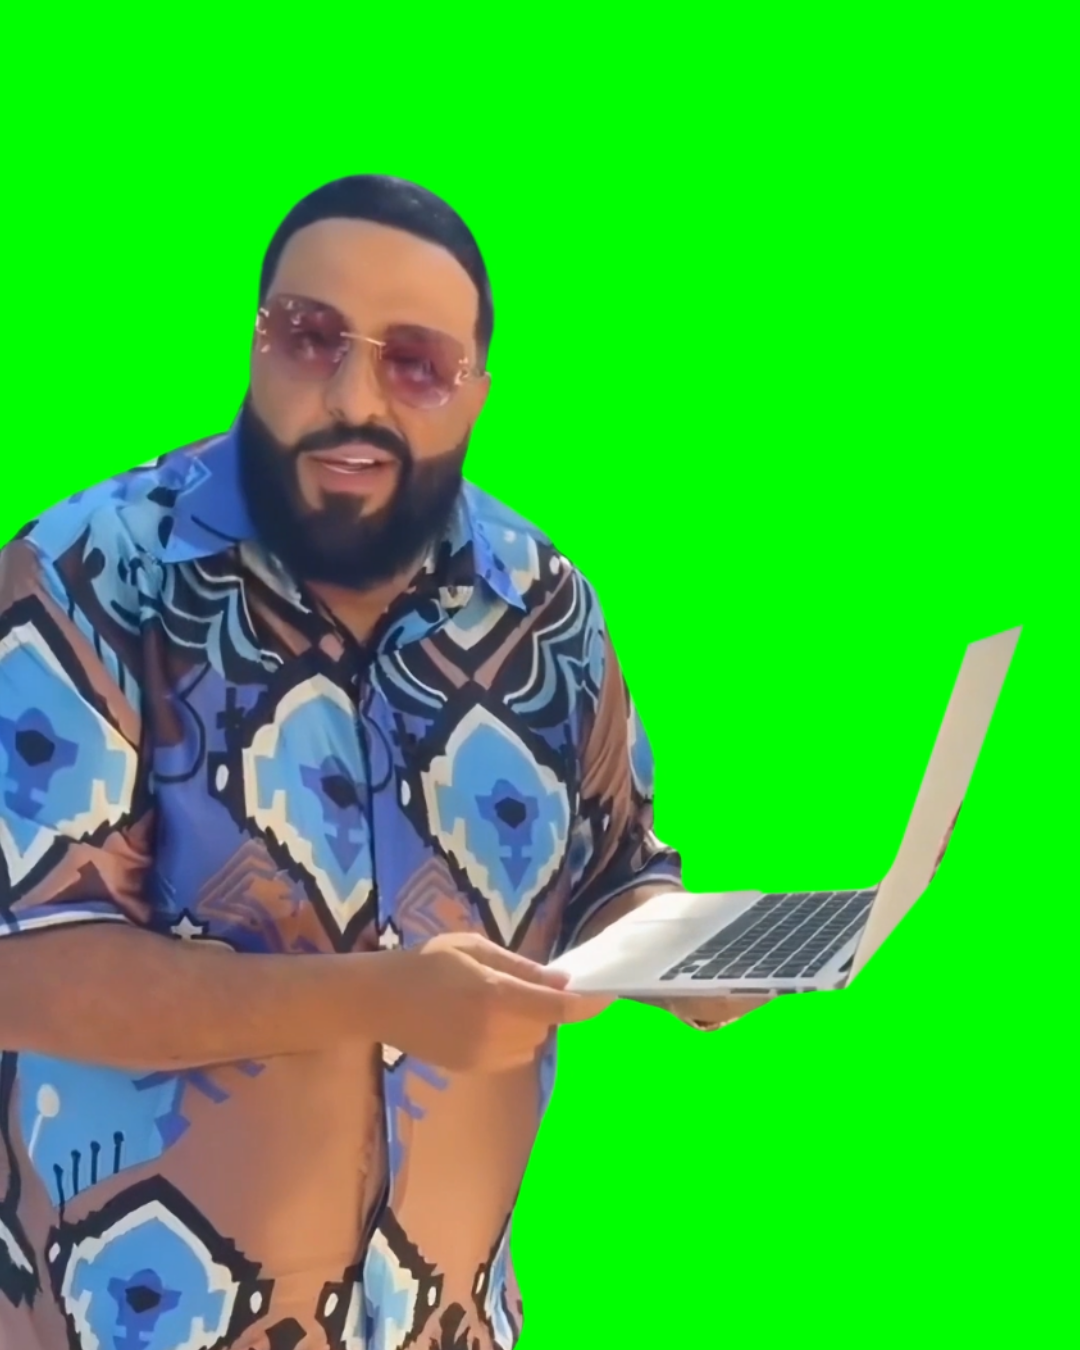 DJ  Khaled- This Sounds Like A New Opportunity meme (Green Screen)